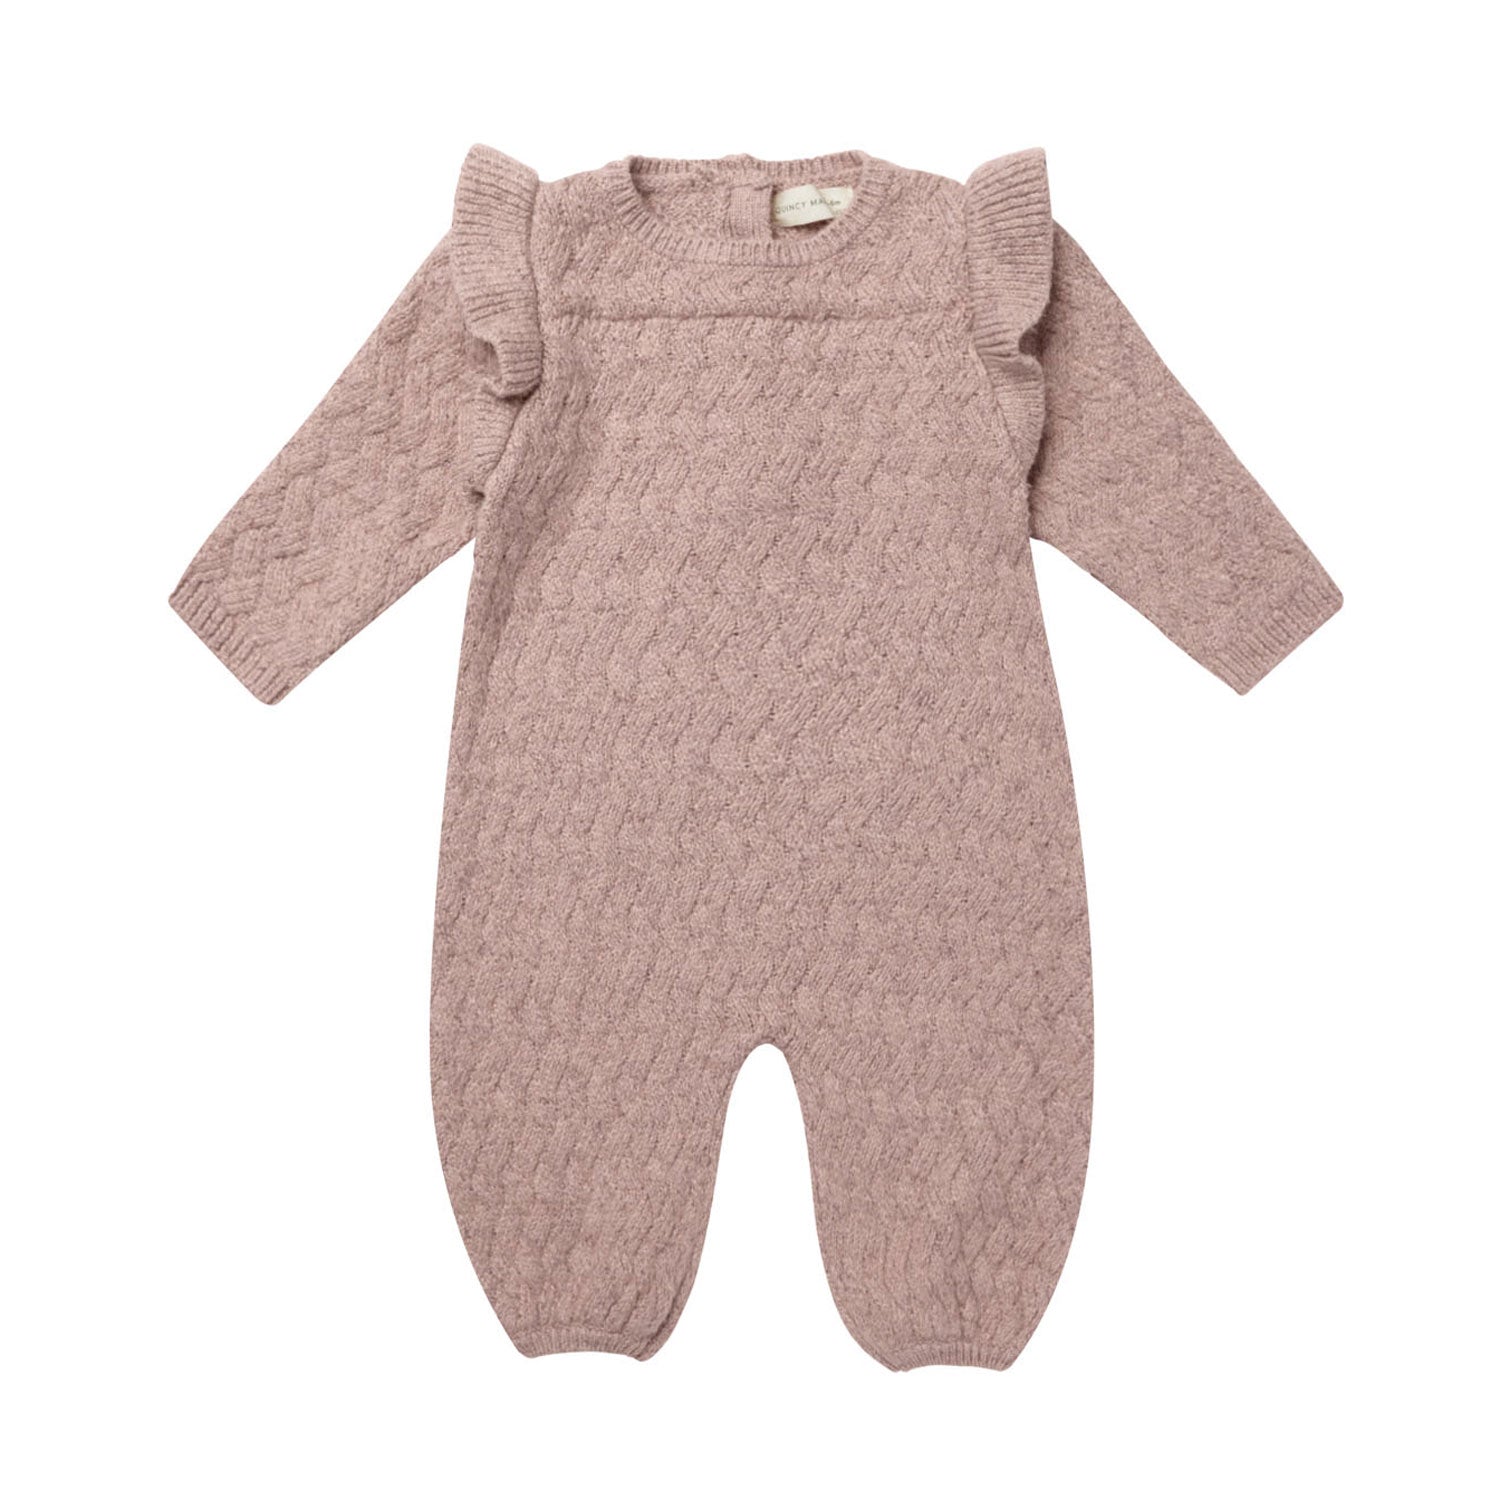 Quincy Mae Long Sleeve Mira Knit Romper - Mauve Heathered